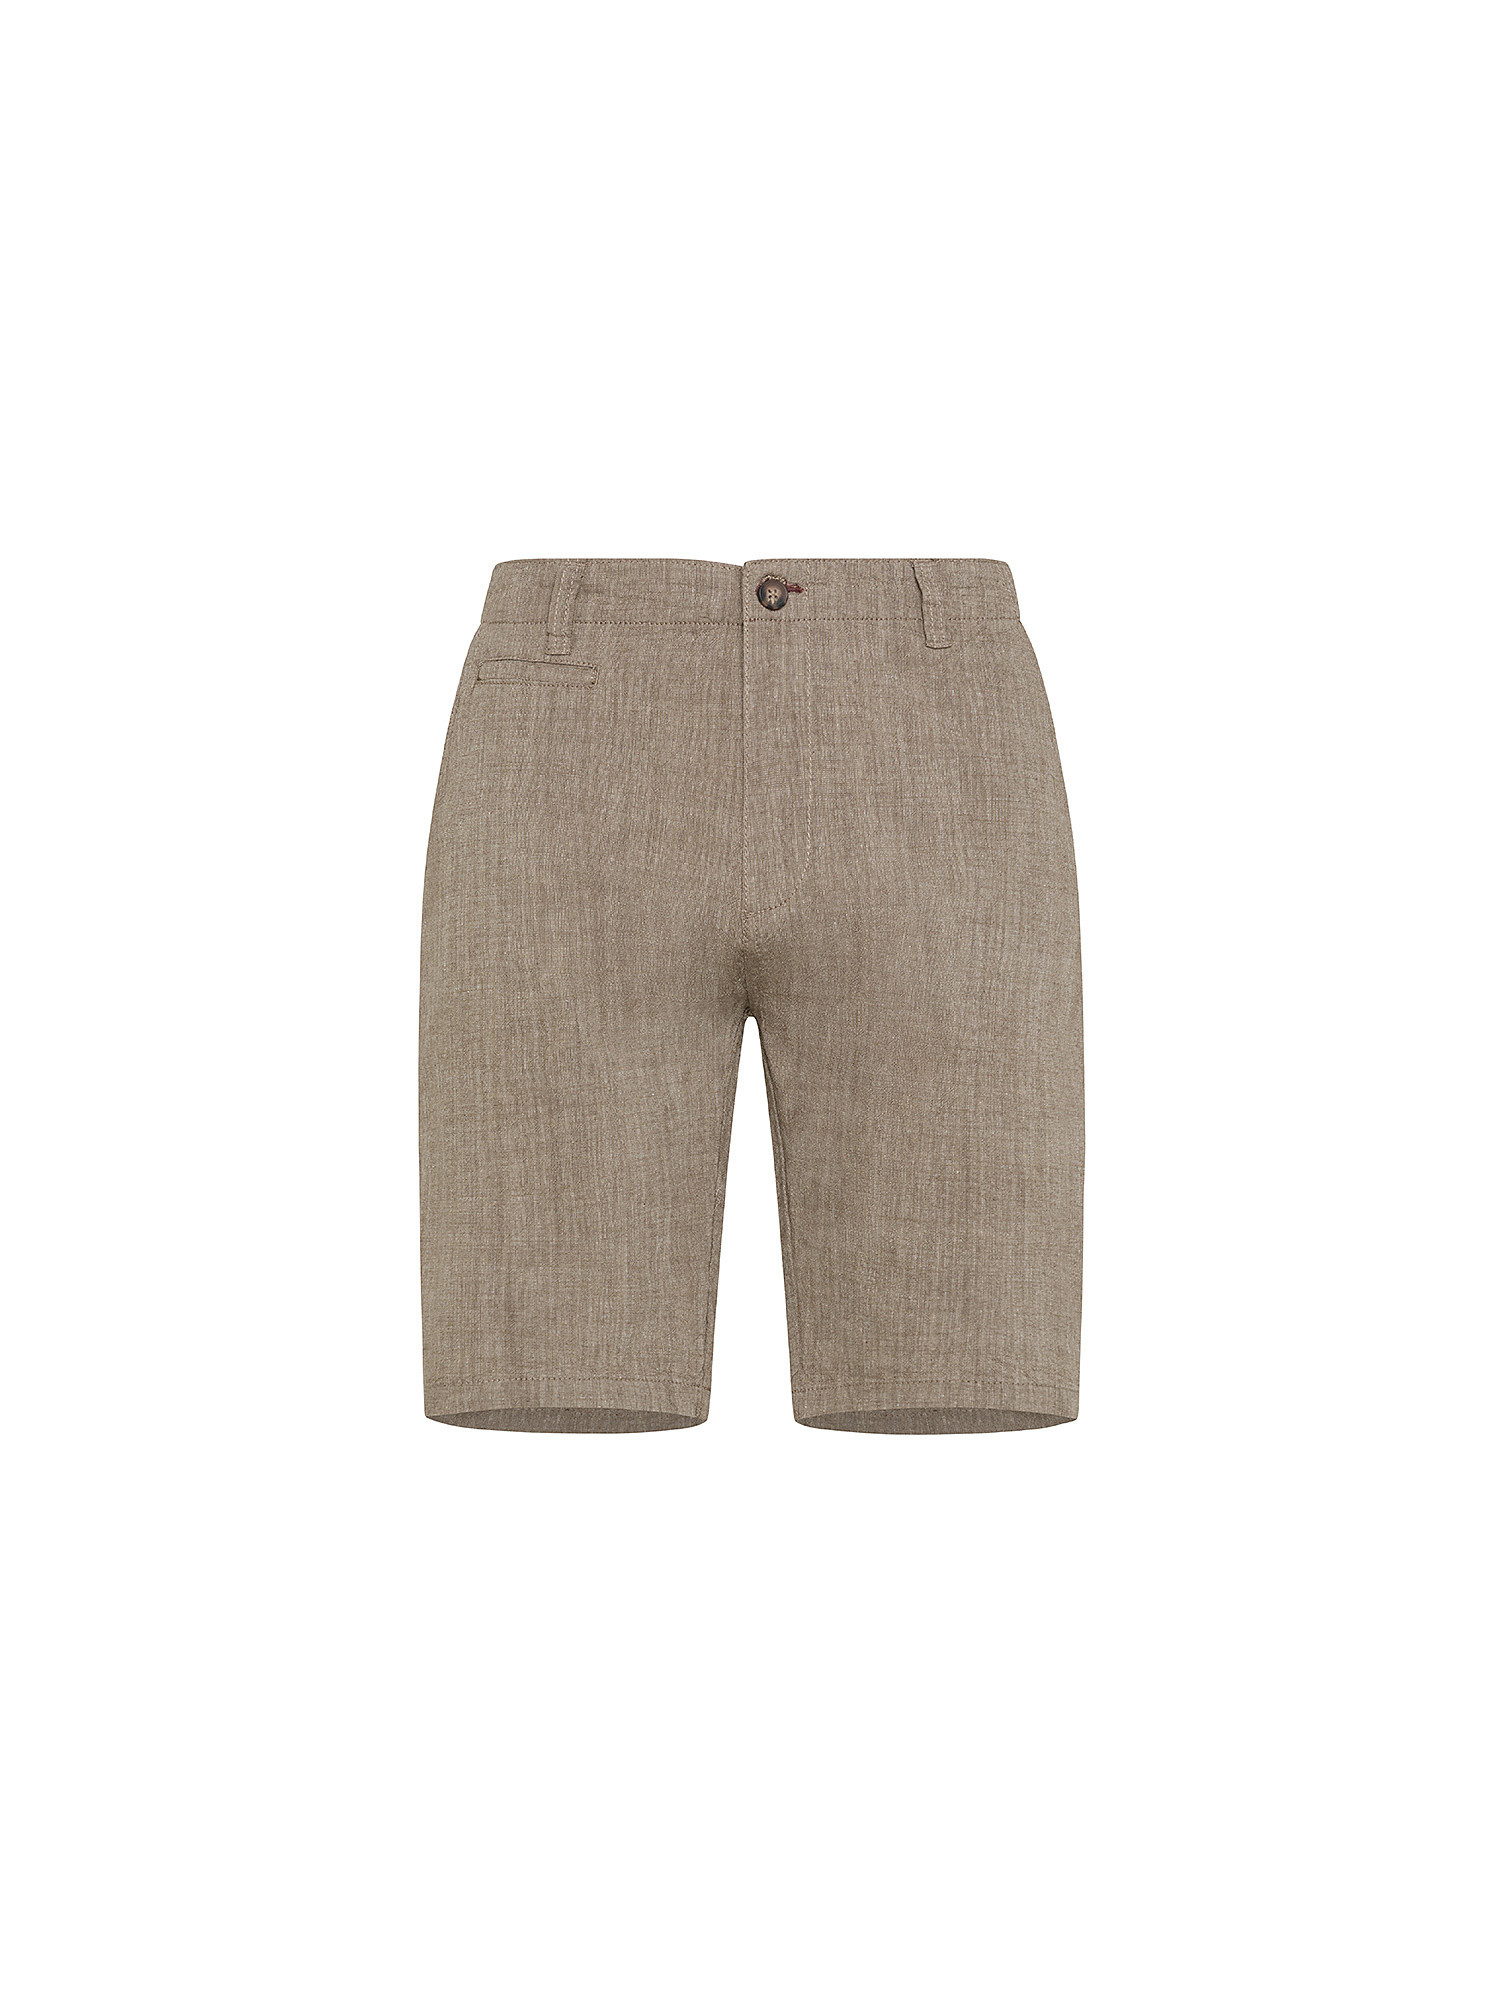 JCT - Chino bermuda in pure cotton, Brown, large image number 0